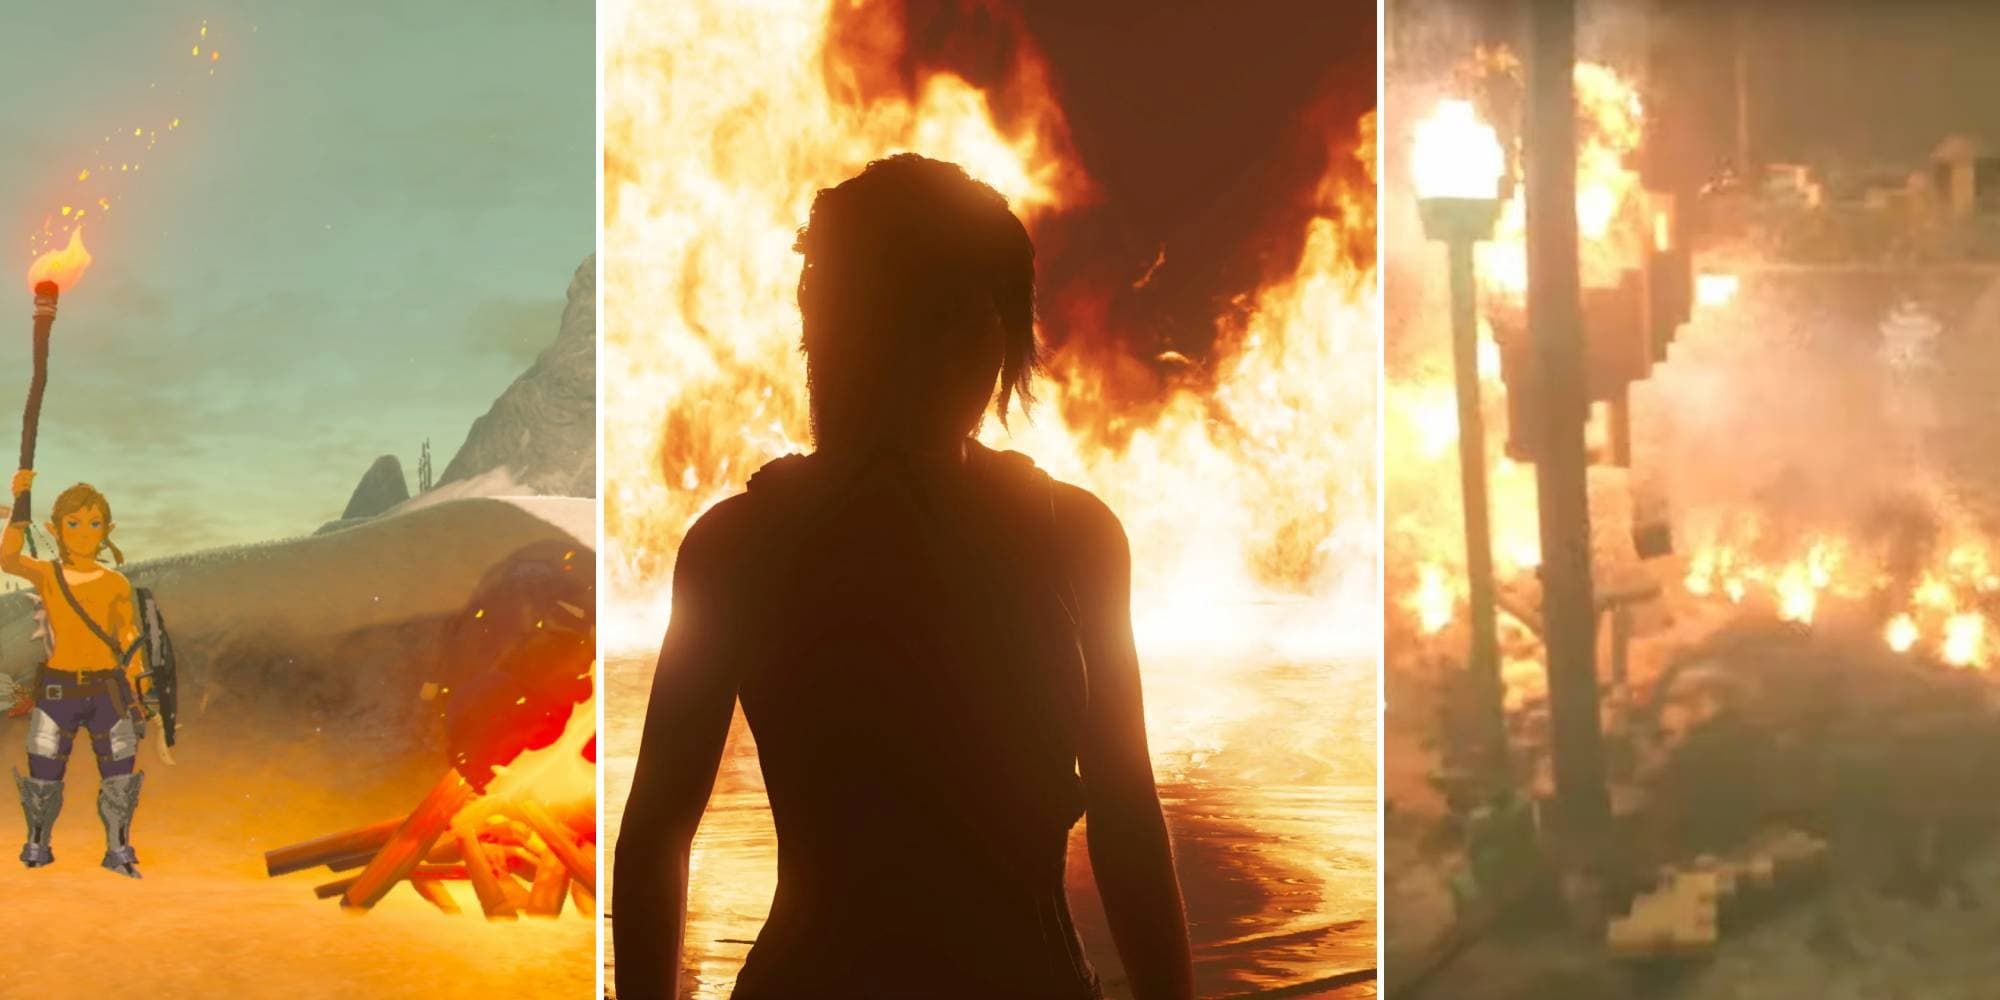 Examples of fire in Breath of the Wild, Shadow of the Tomb Raider, and Teardown.